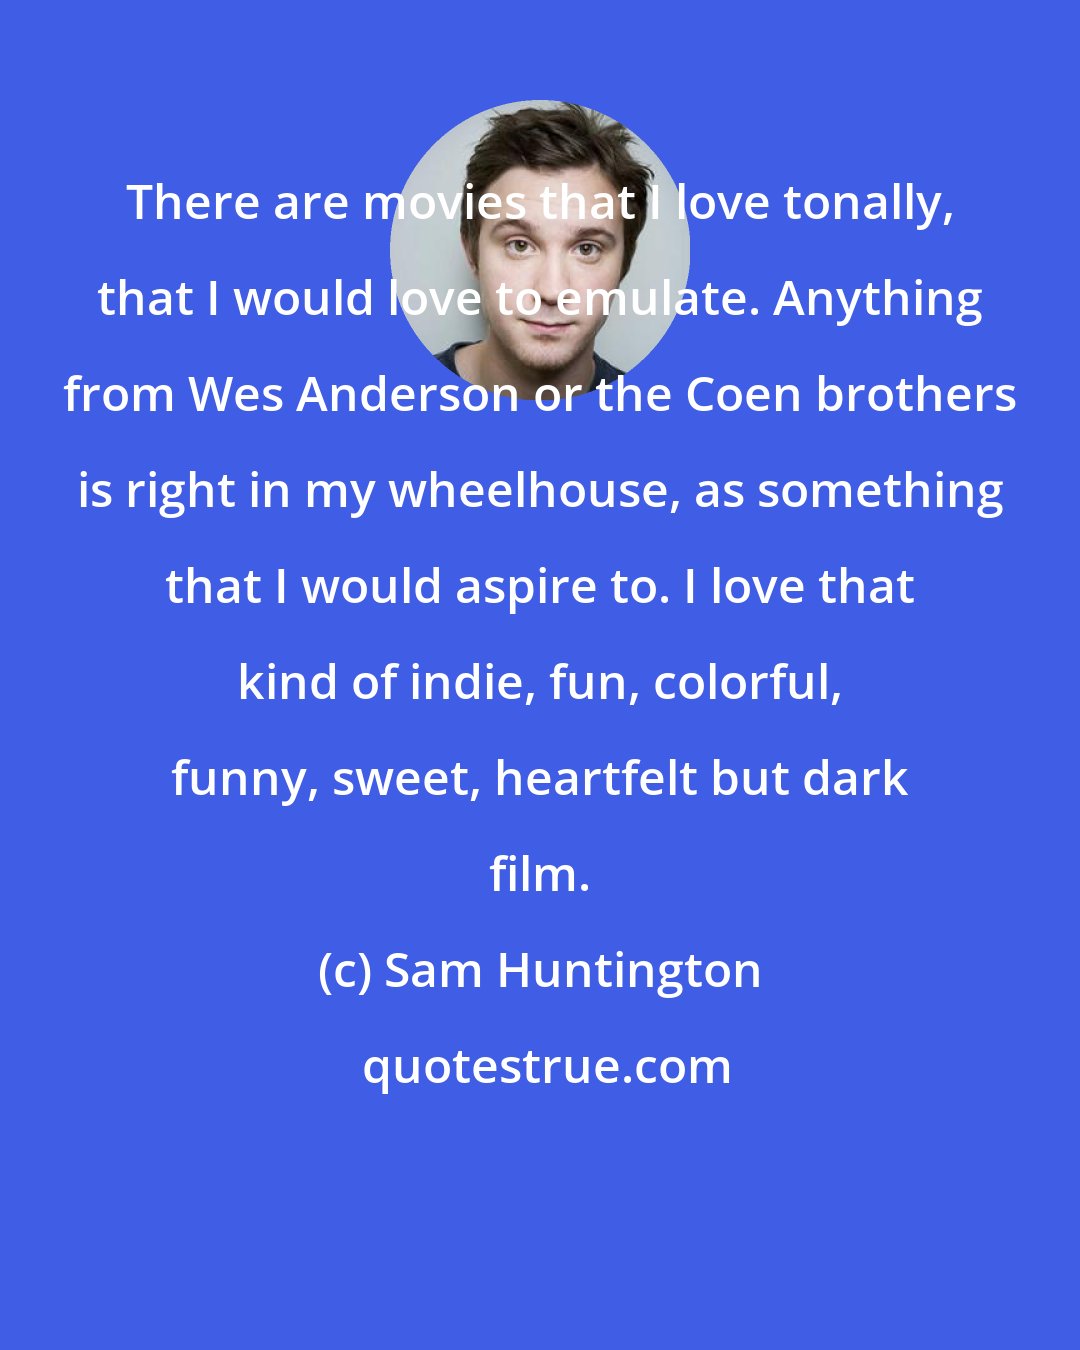 Sam Huntington: There are movies that I love tonally, that I would love to emulate. Anything from Wes Anderson or the Coen brothers is right in my wheelhouse, as something that I would aspire to. I love that kind of indie, fun, colorful, funny, sweet, heartfelt but dark film.